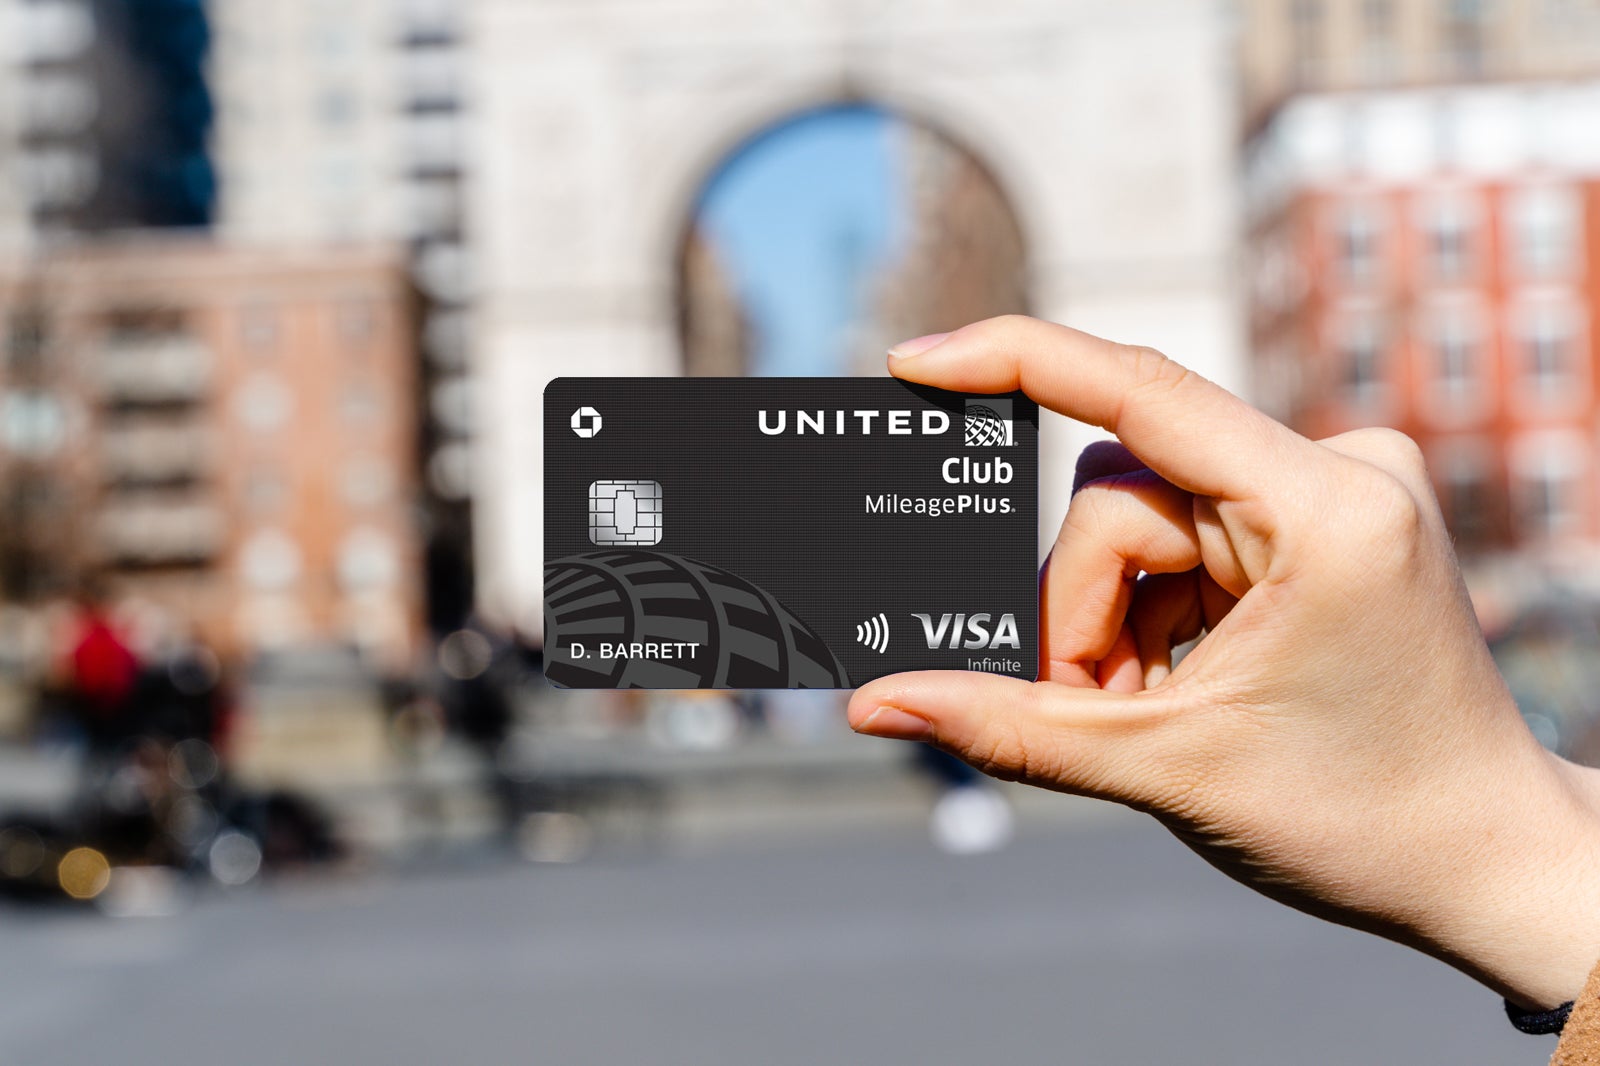 Learn a little bit more about the United Club Infinite card. Source: Million Mile Secrets